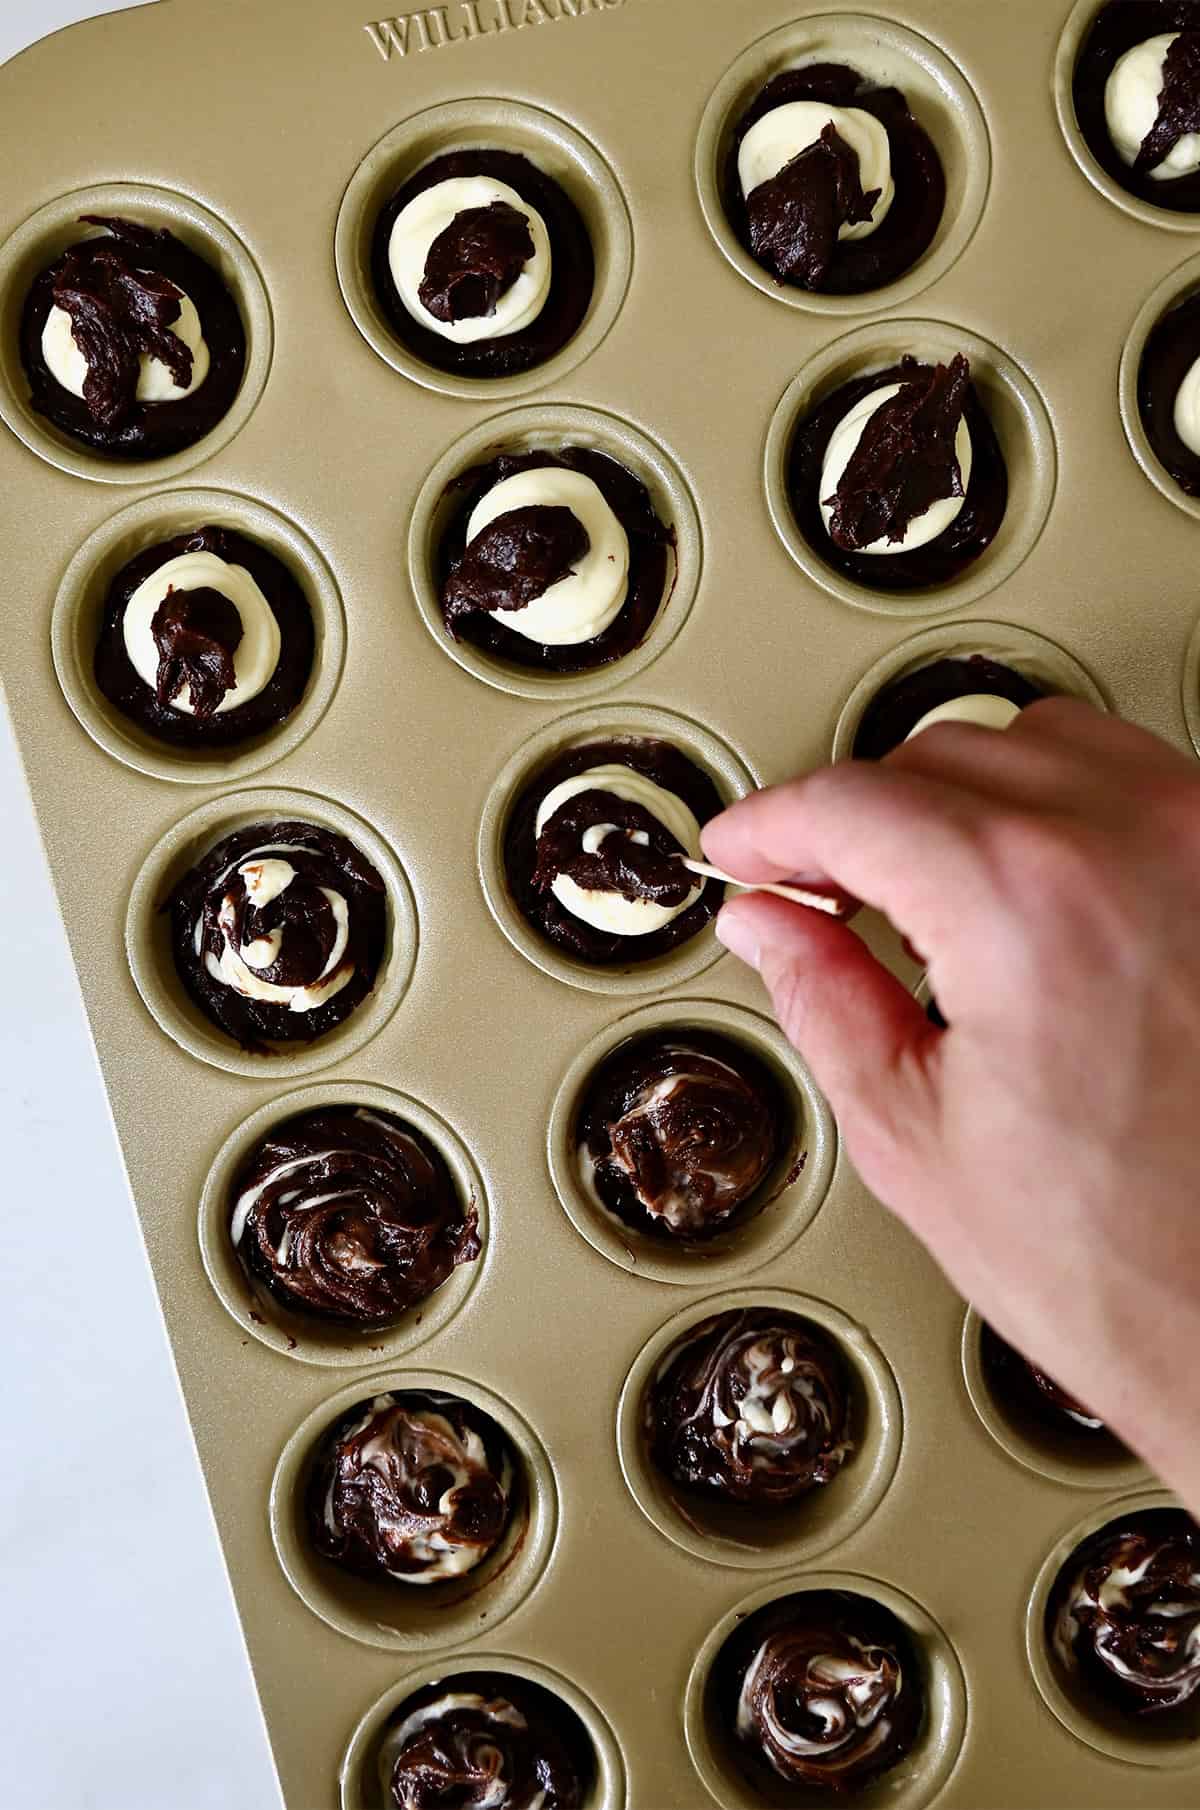 Cheesecake filling and brownie batter is swirled together with a toothpick in a mini muffin pan.